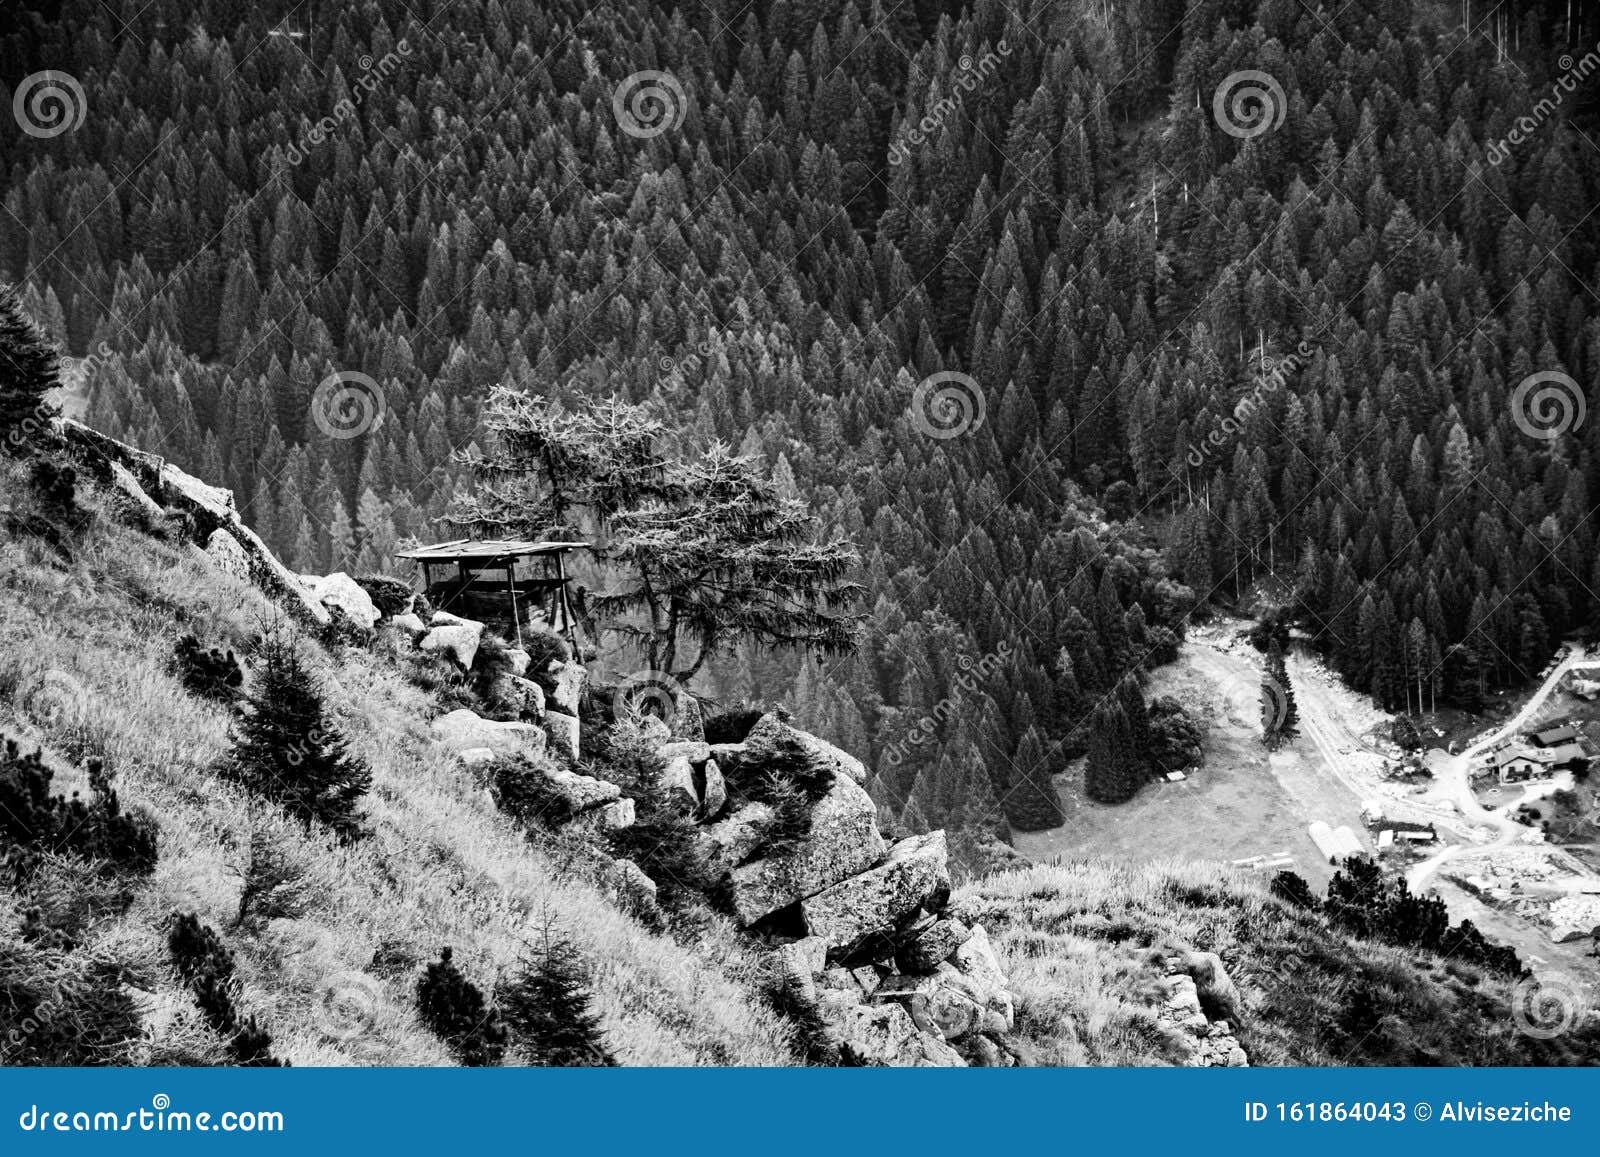 Hunting lodge with a view stock image. Image of county ...